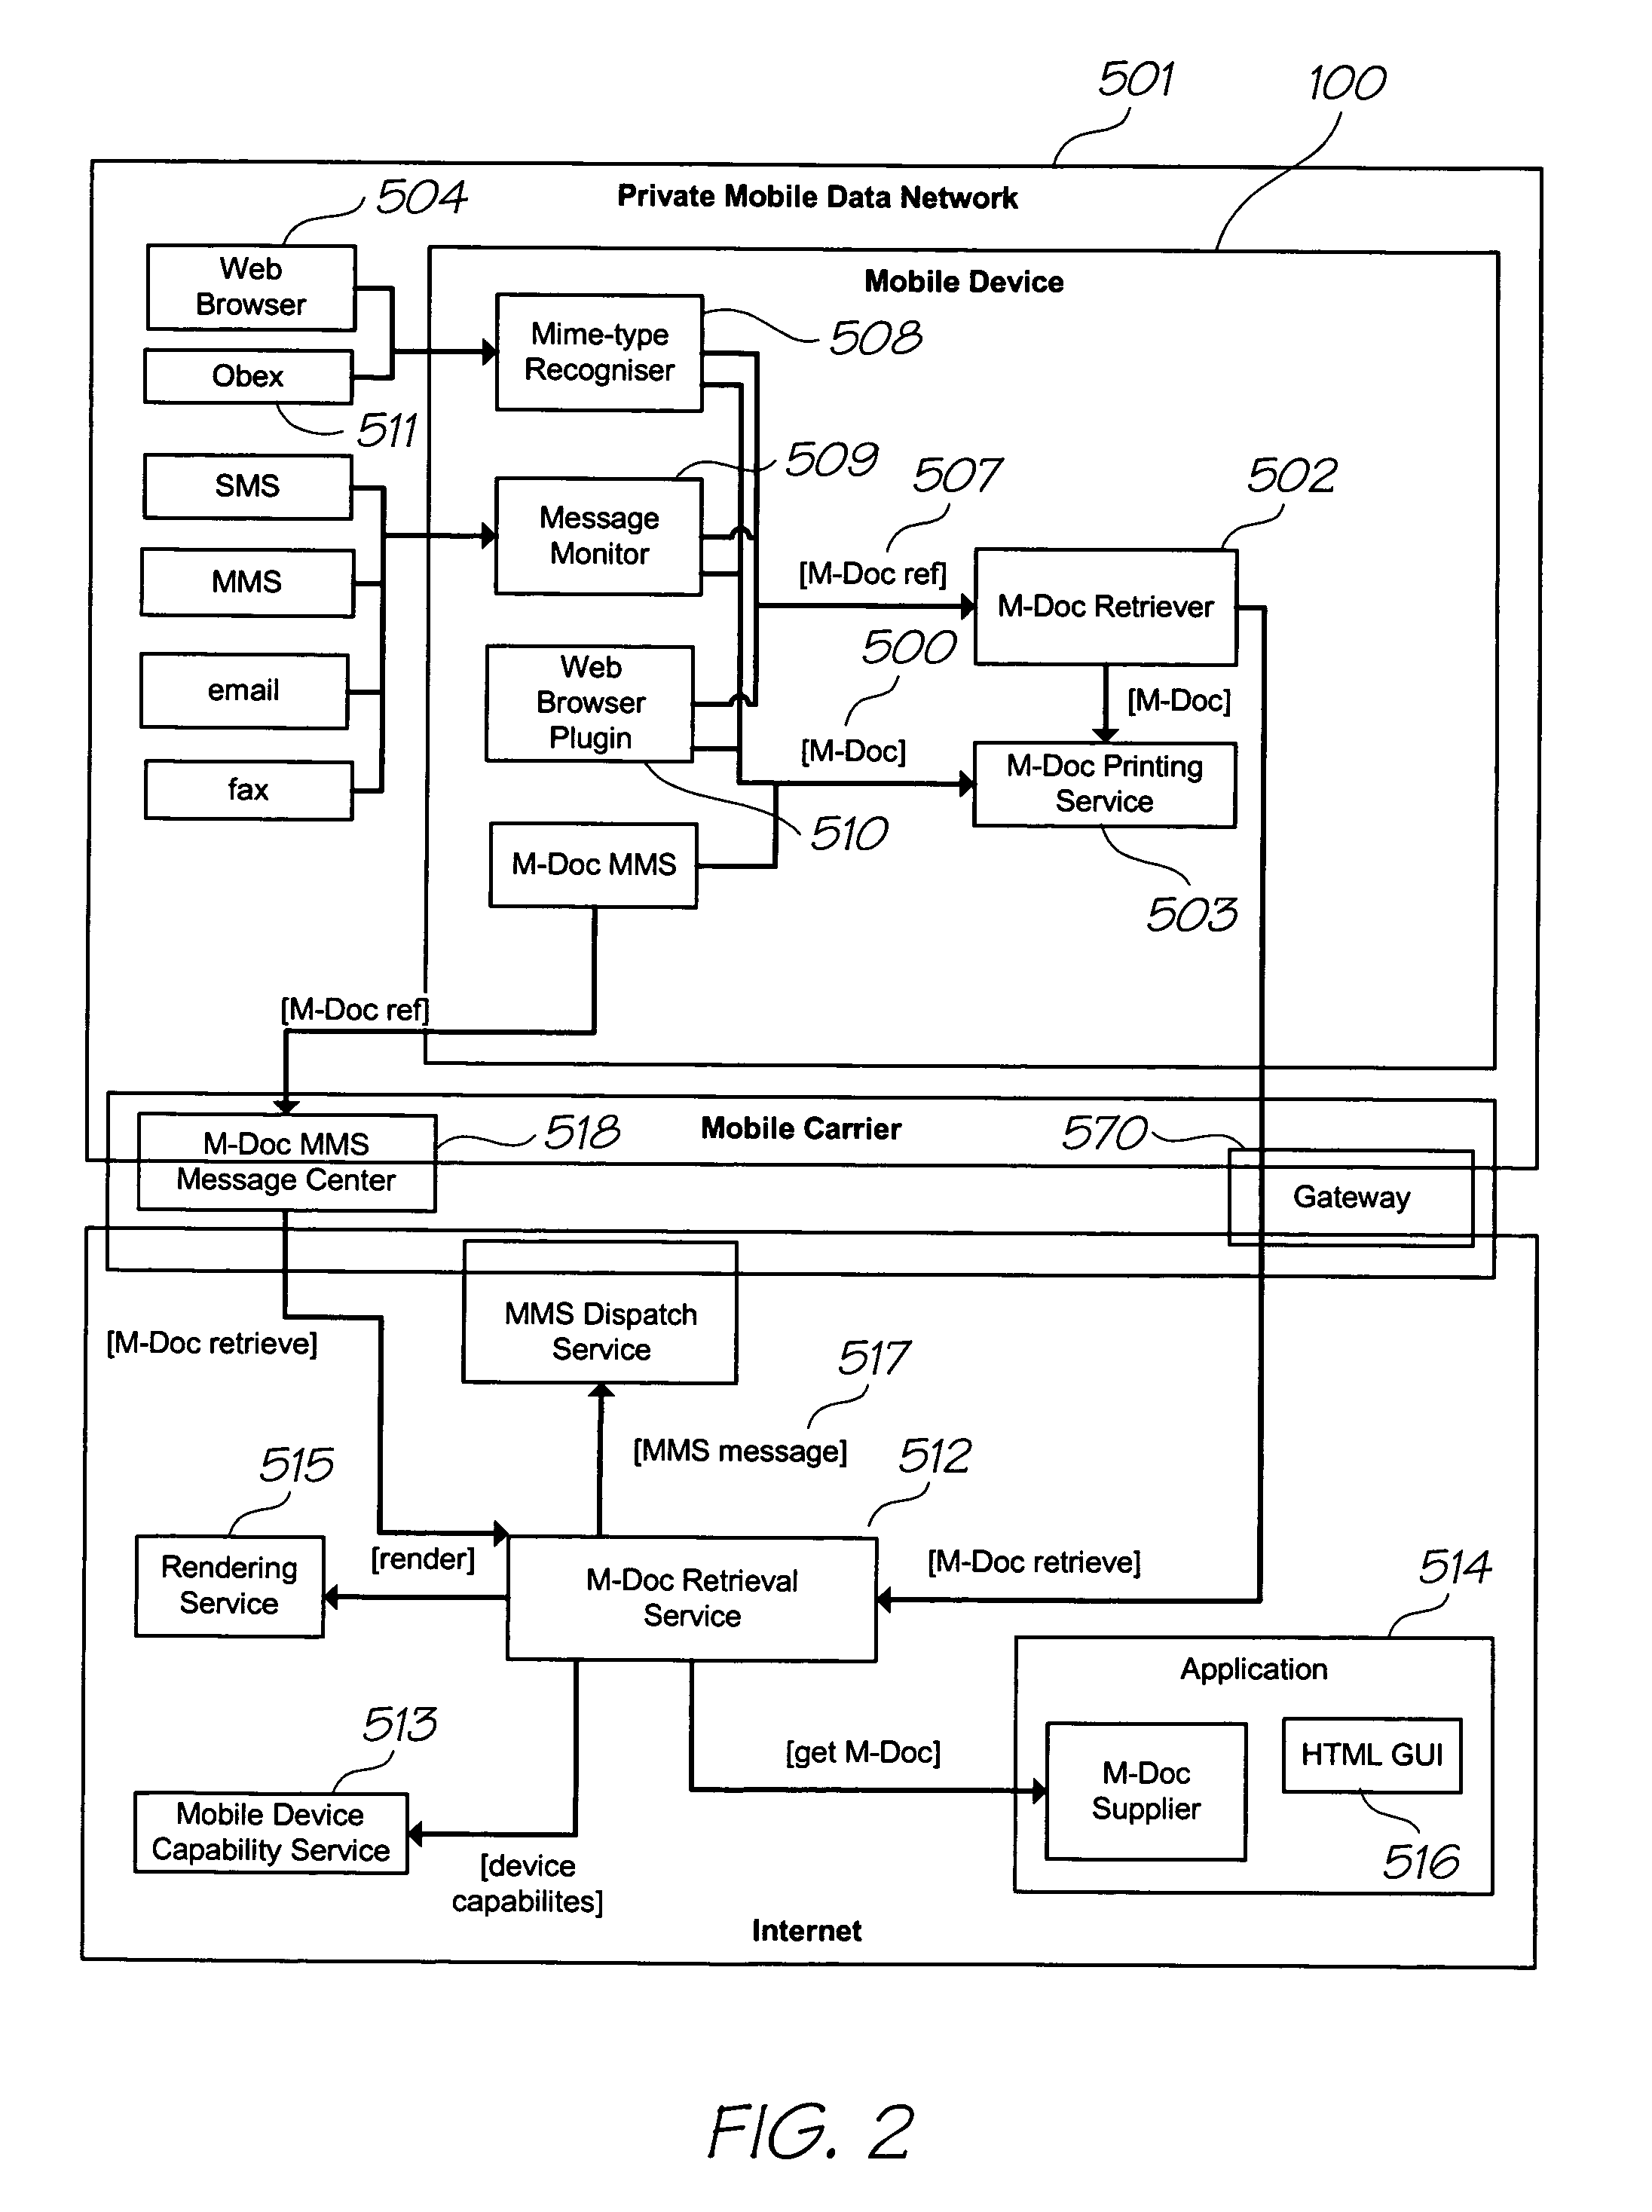 Printing audio information using a mobile device